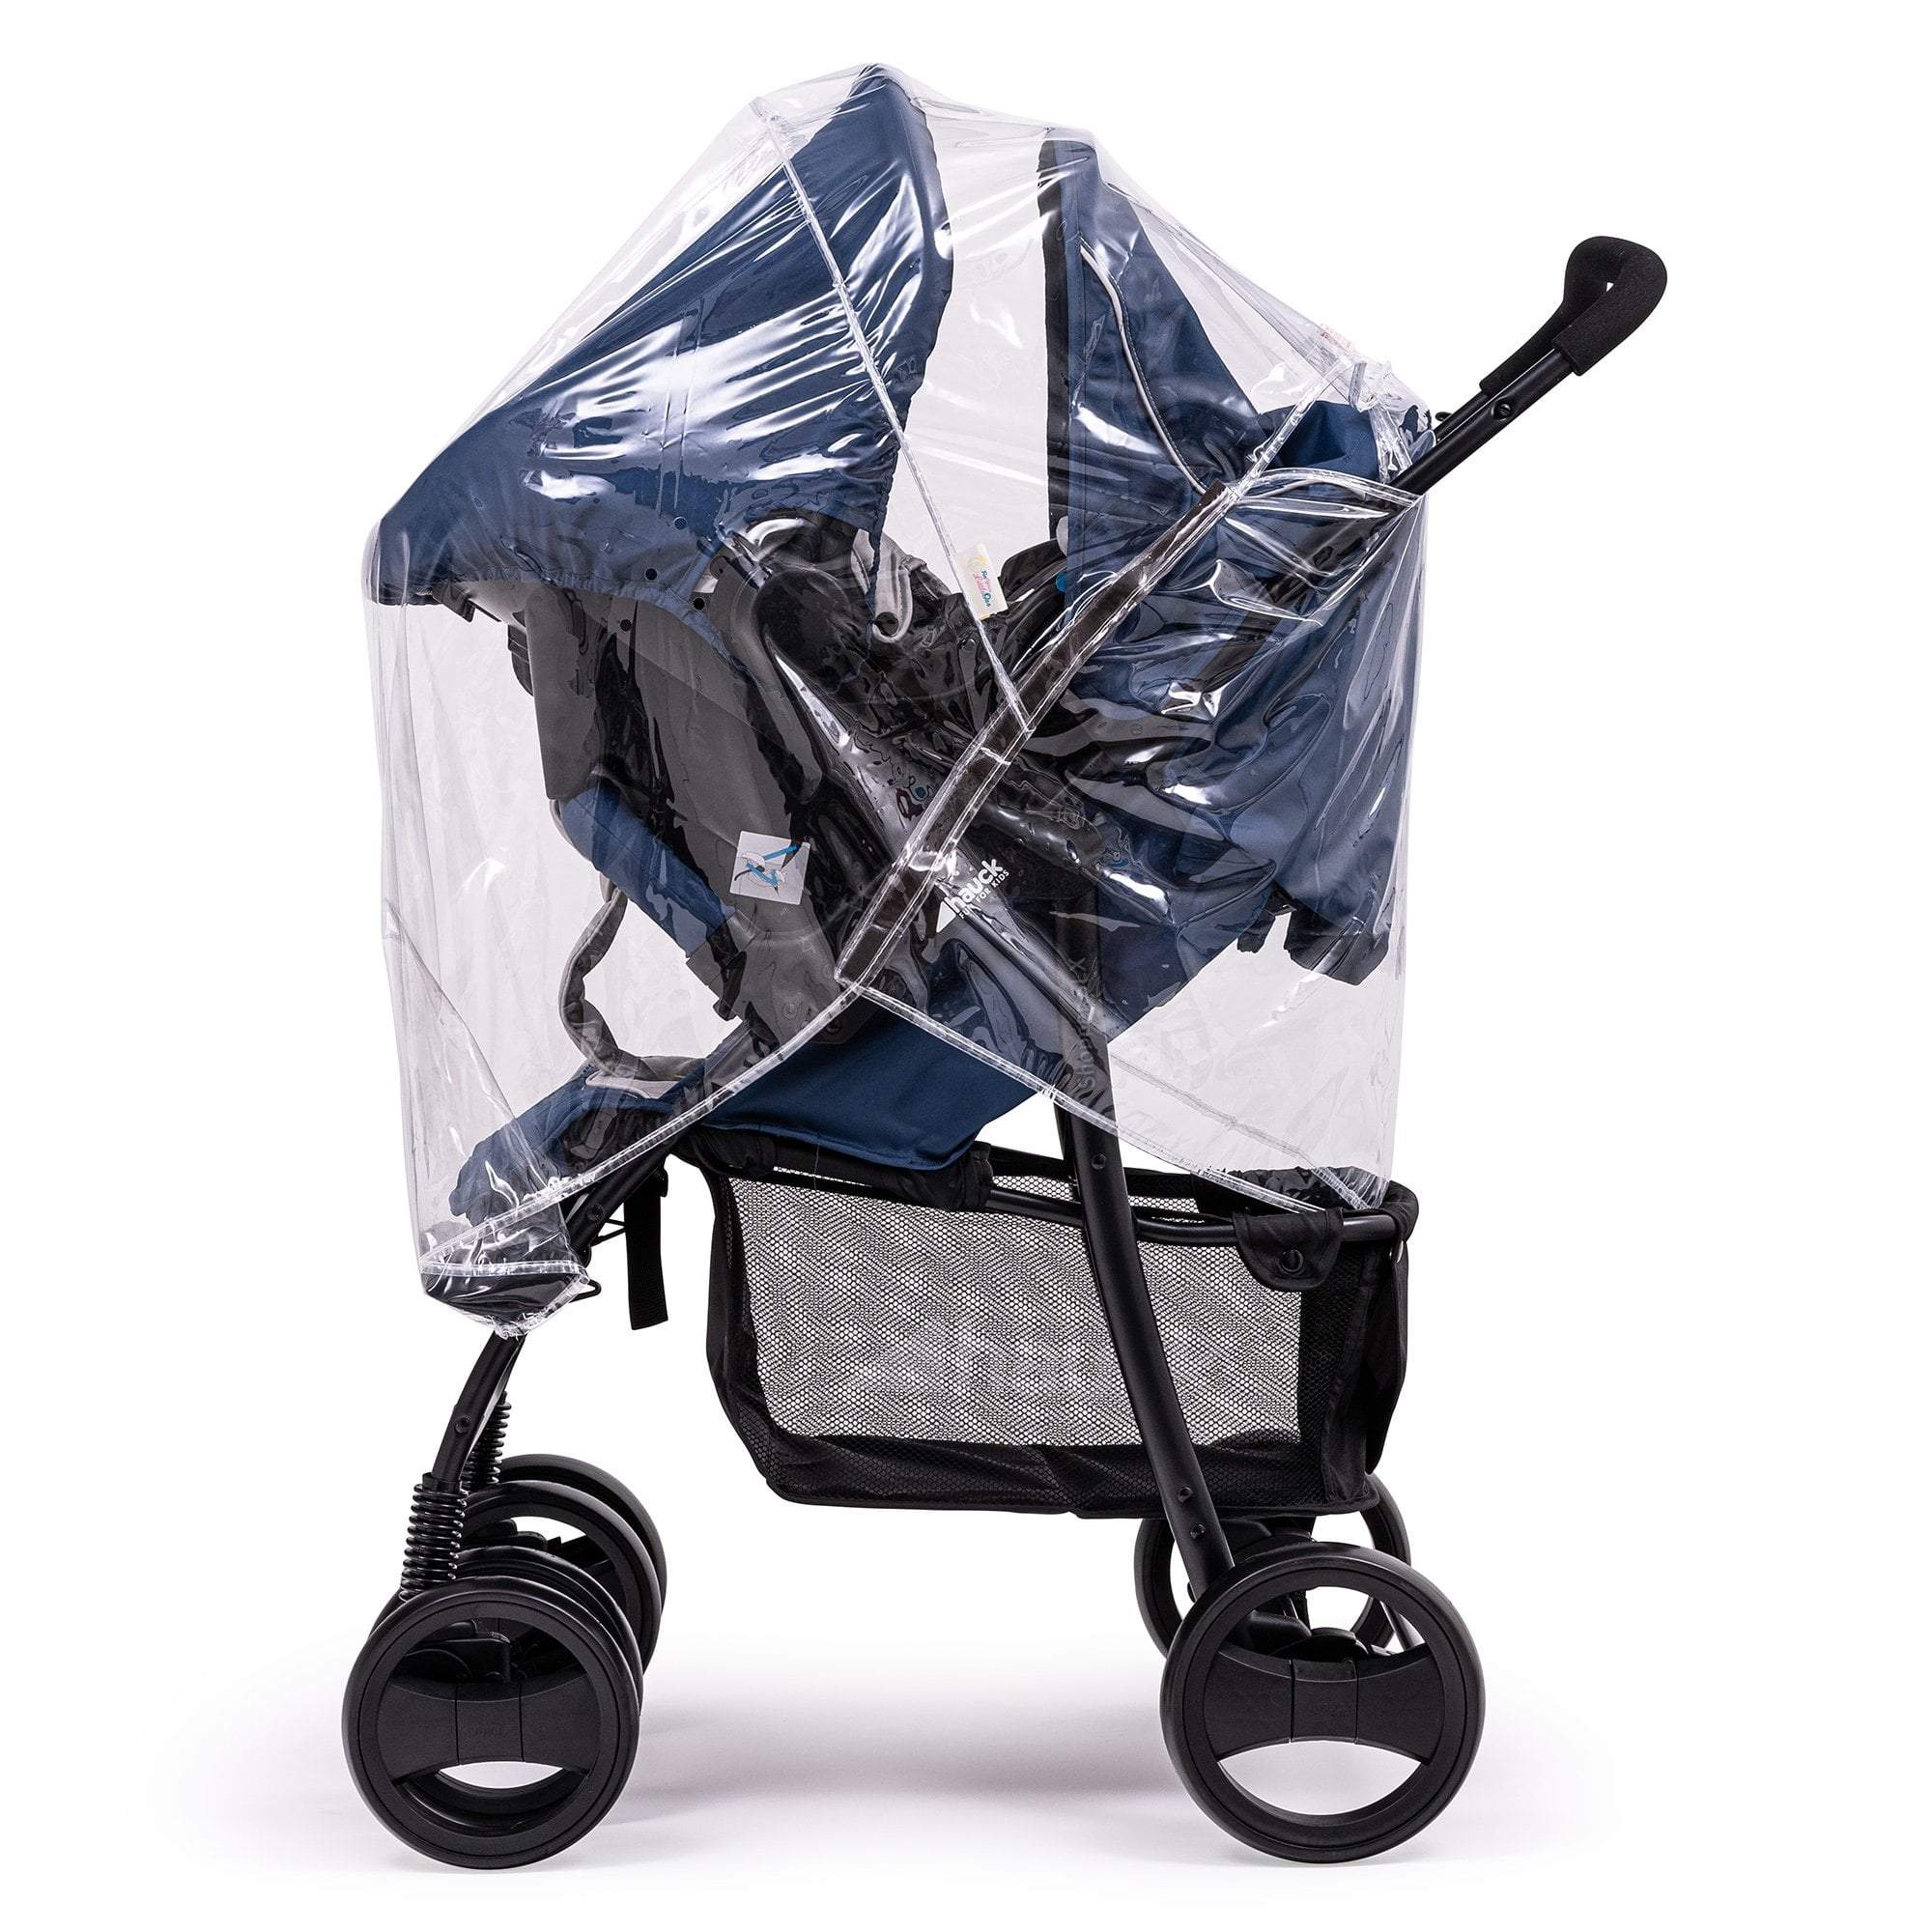 Travel System Raincover Compatible with Casual - Fits All Models - For Your Little One